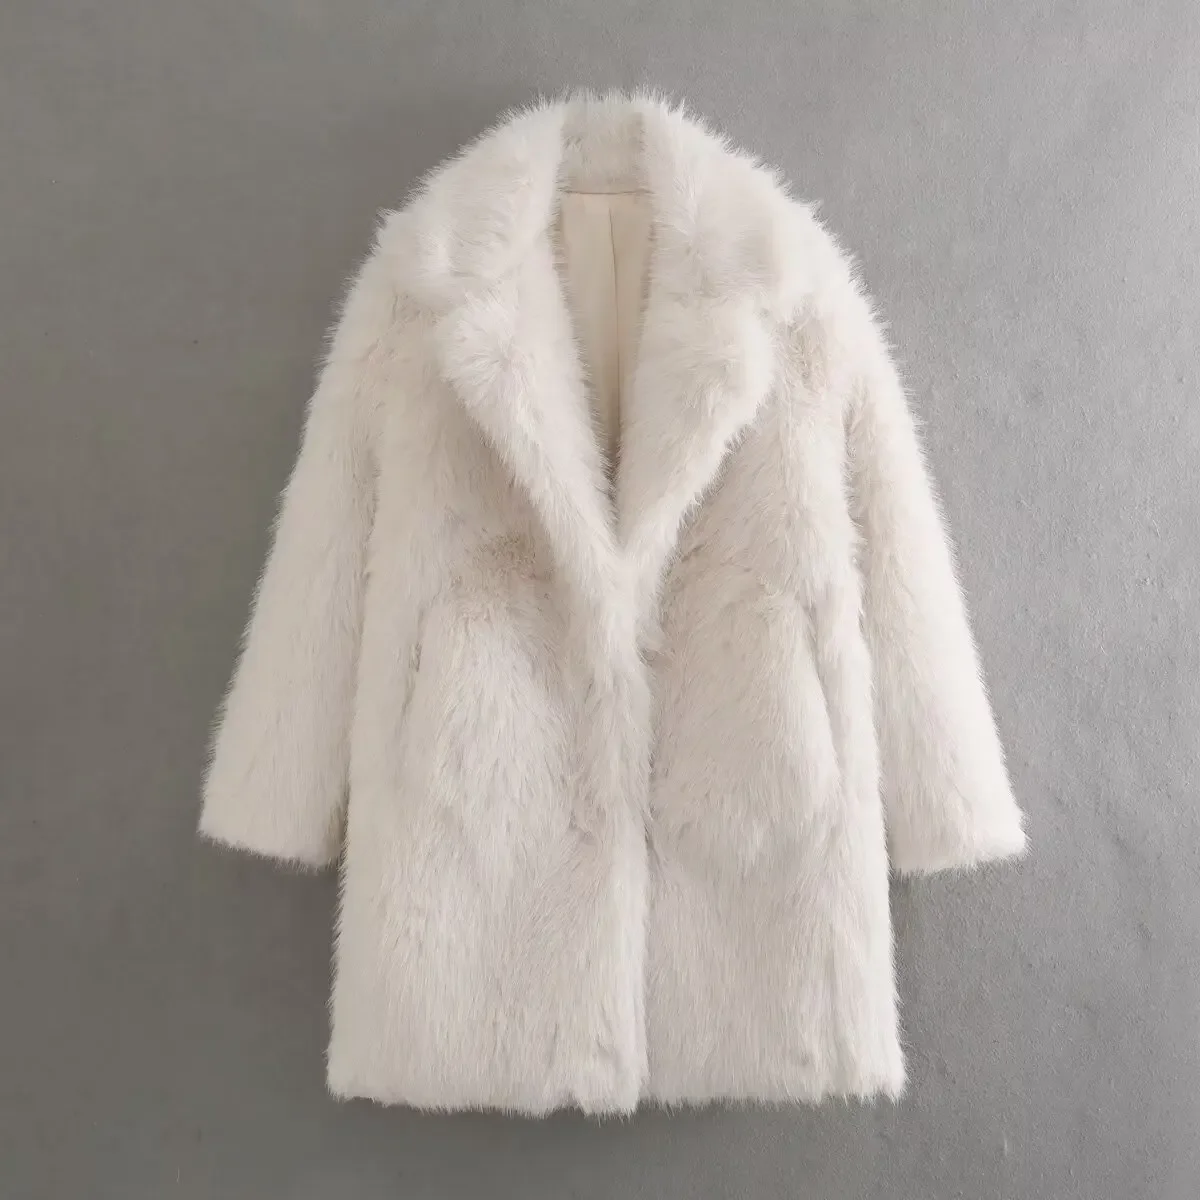 

Women New Fashion Artificial fur effect Loose Long style Warm Coat Vintage Long Sleeve Button-up Female Outerwear Chic Overshirt